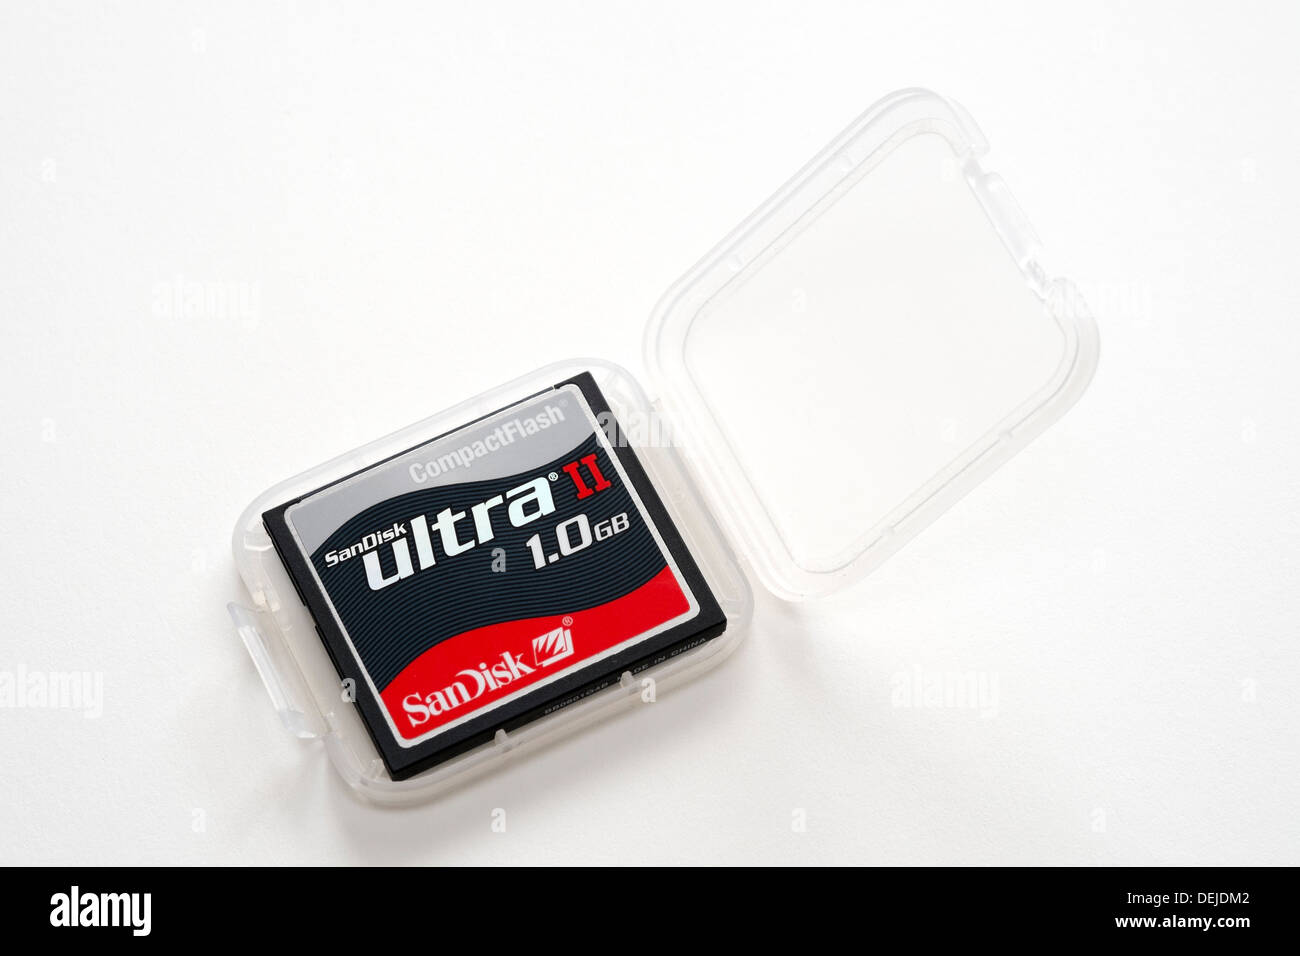 Sandisk Ultra II Compact flash 1GB memory card in plastic case on white background Stock Photo